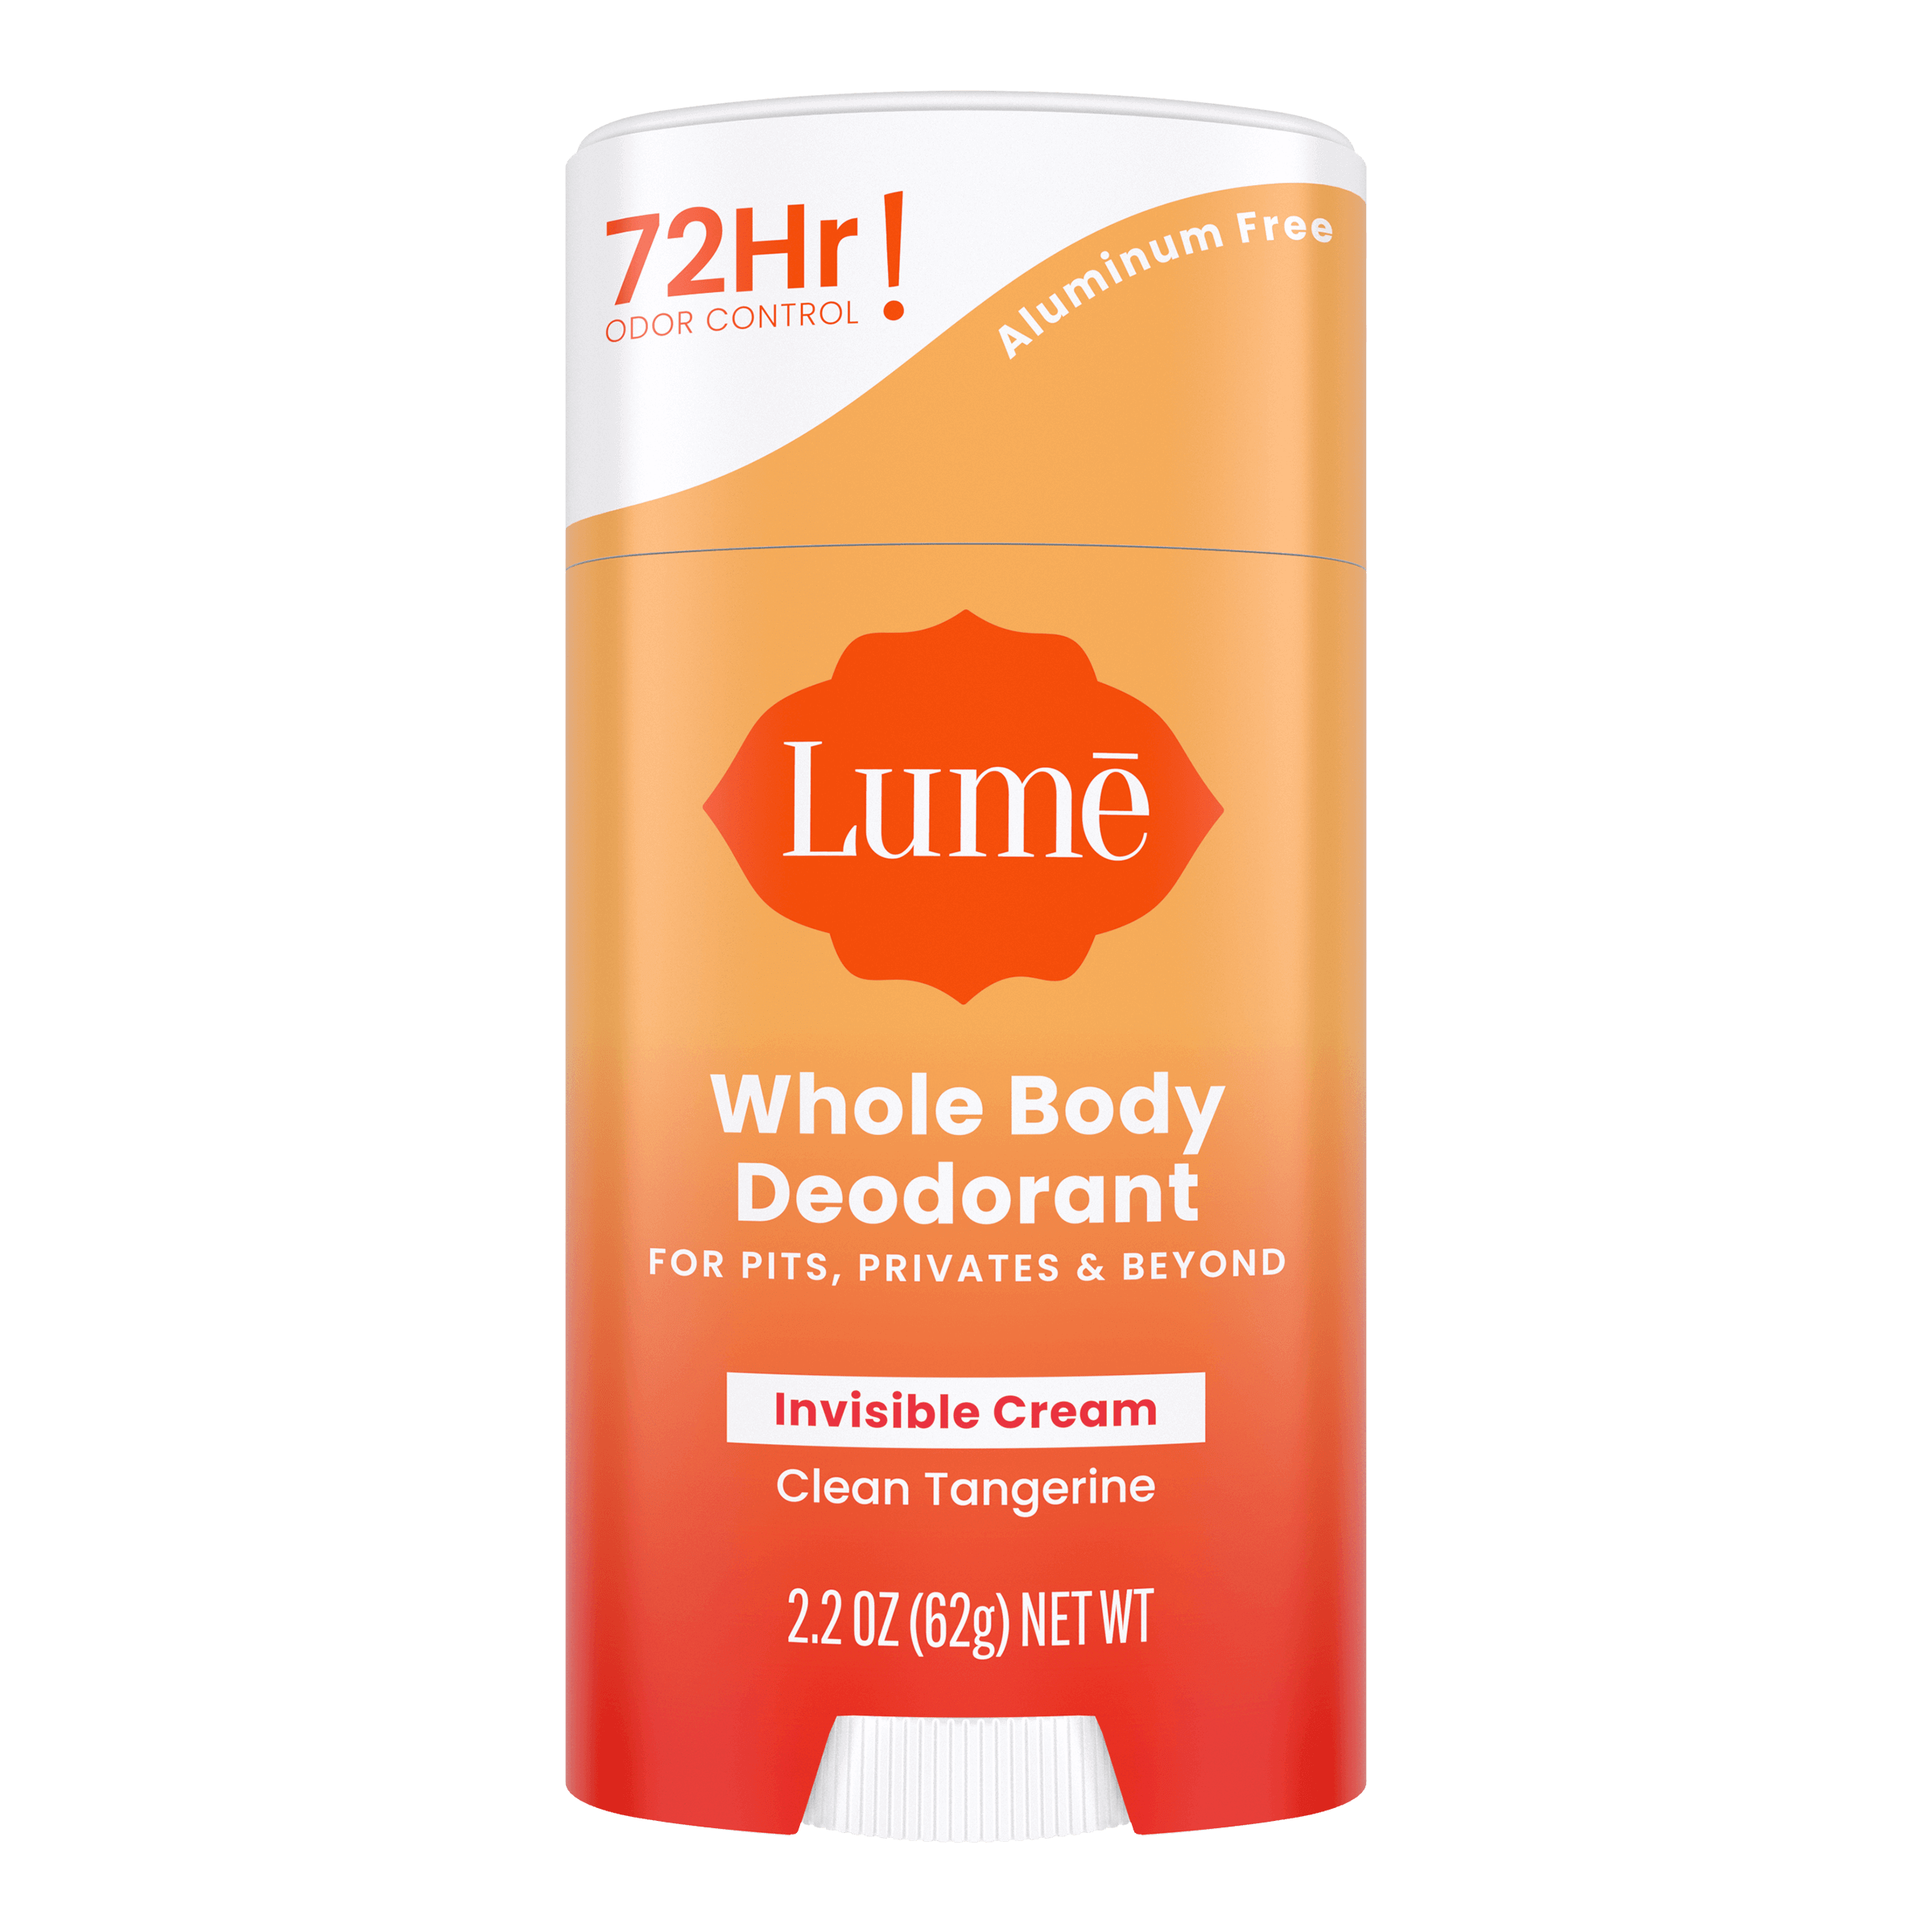 Clean Tangerine Cream Deodorant Stick | Lume Deodorant | Outrageously Effective Whole Body